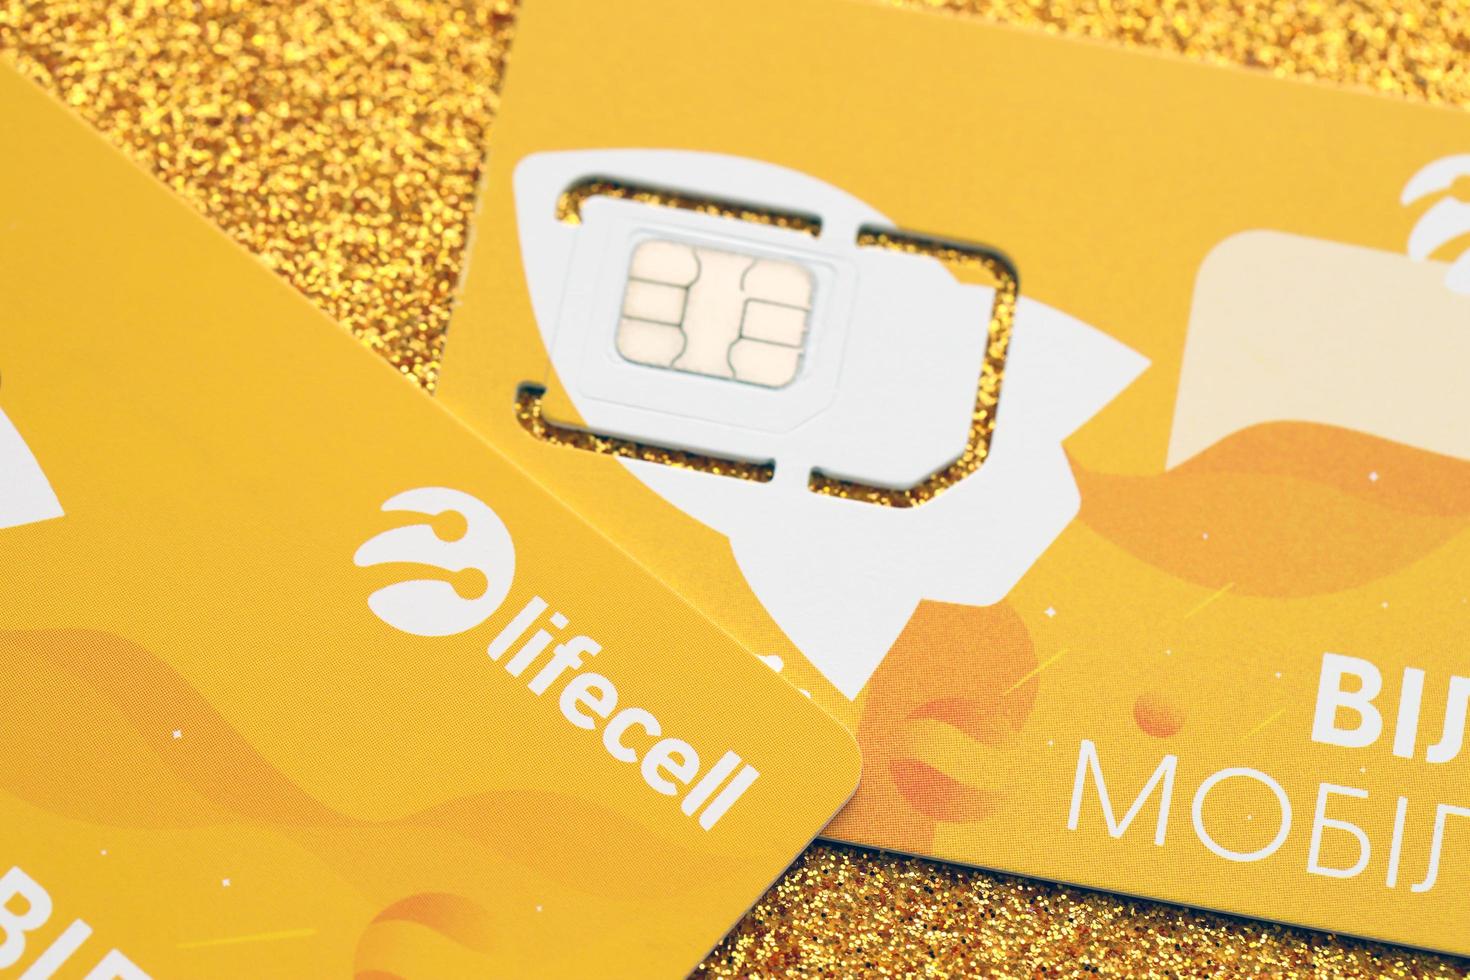 TERNOPIL, UKRAINE - JULY 5, 2022 Lifecell new sim card with free contract on yellow background. Lifecell is ukrainian mobile telephone network operator and provider of wireless connection photo